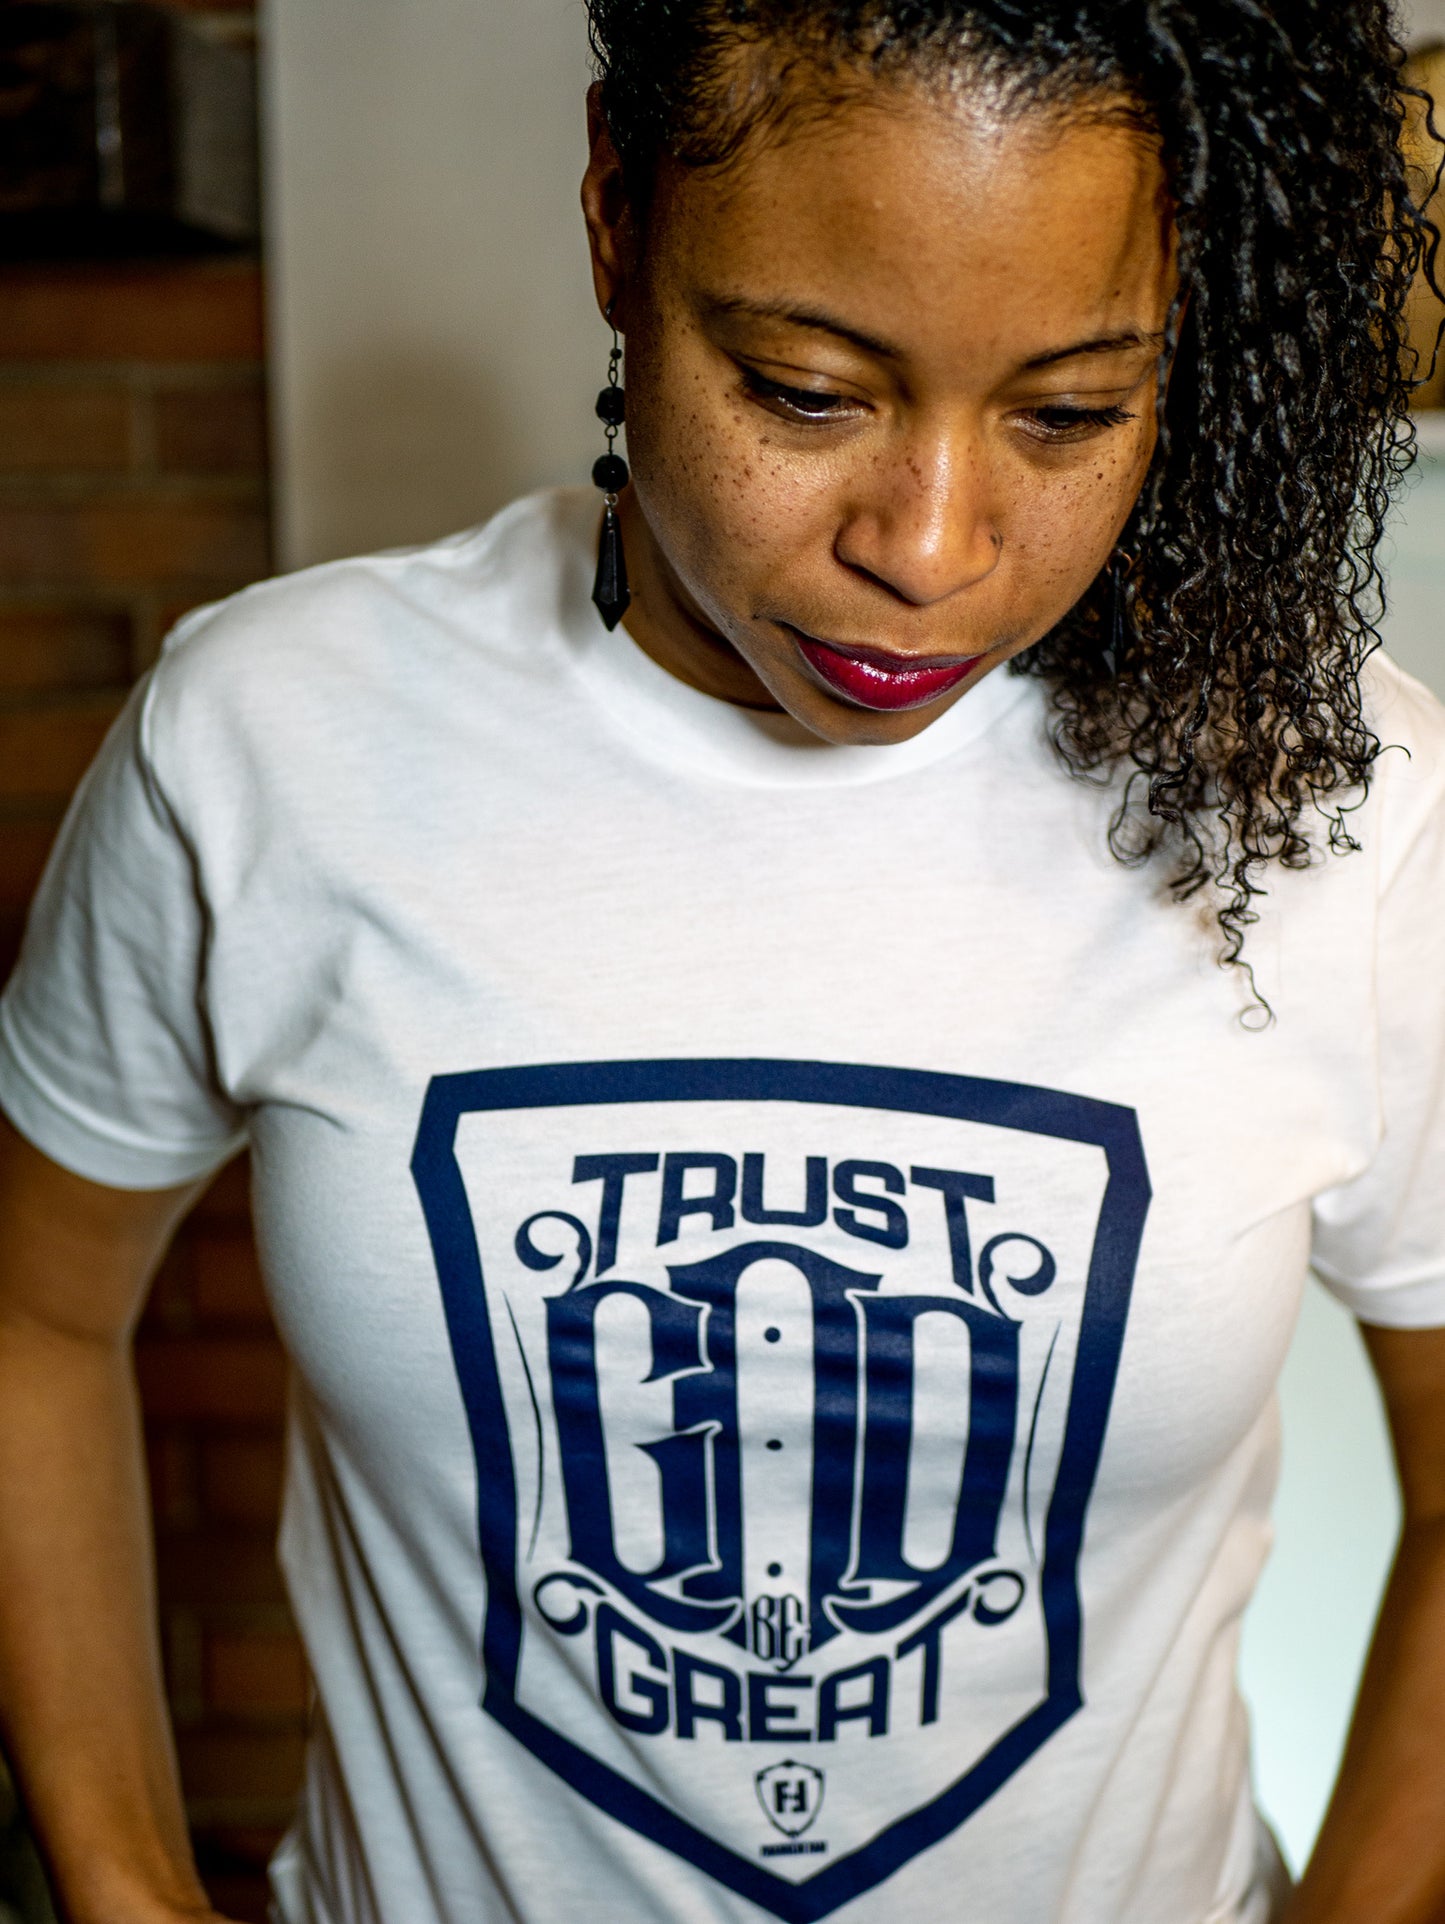 Trust God Be Great Shield White T-shirt (White with Navy Print)